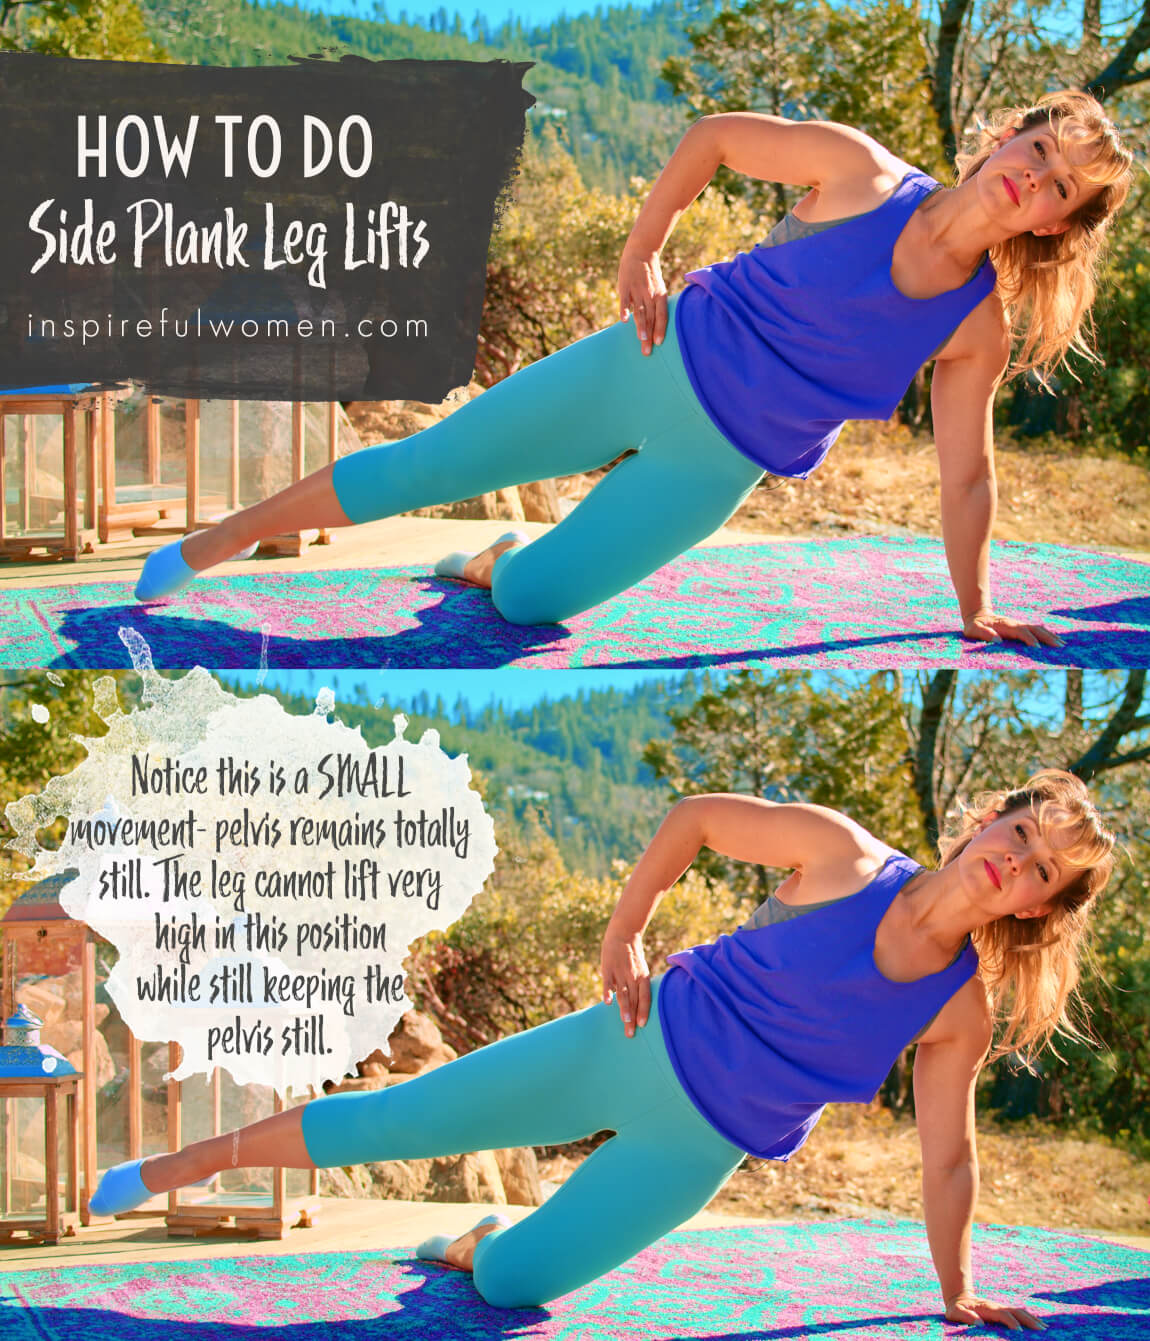 how-to-do-side-plank-leg-lifts-glutes-workout-at-home-tutorial-for-women-40-plus